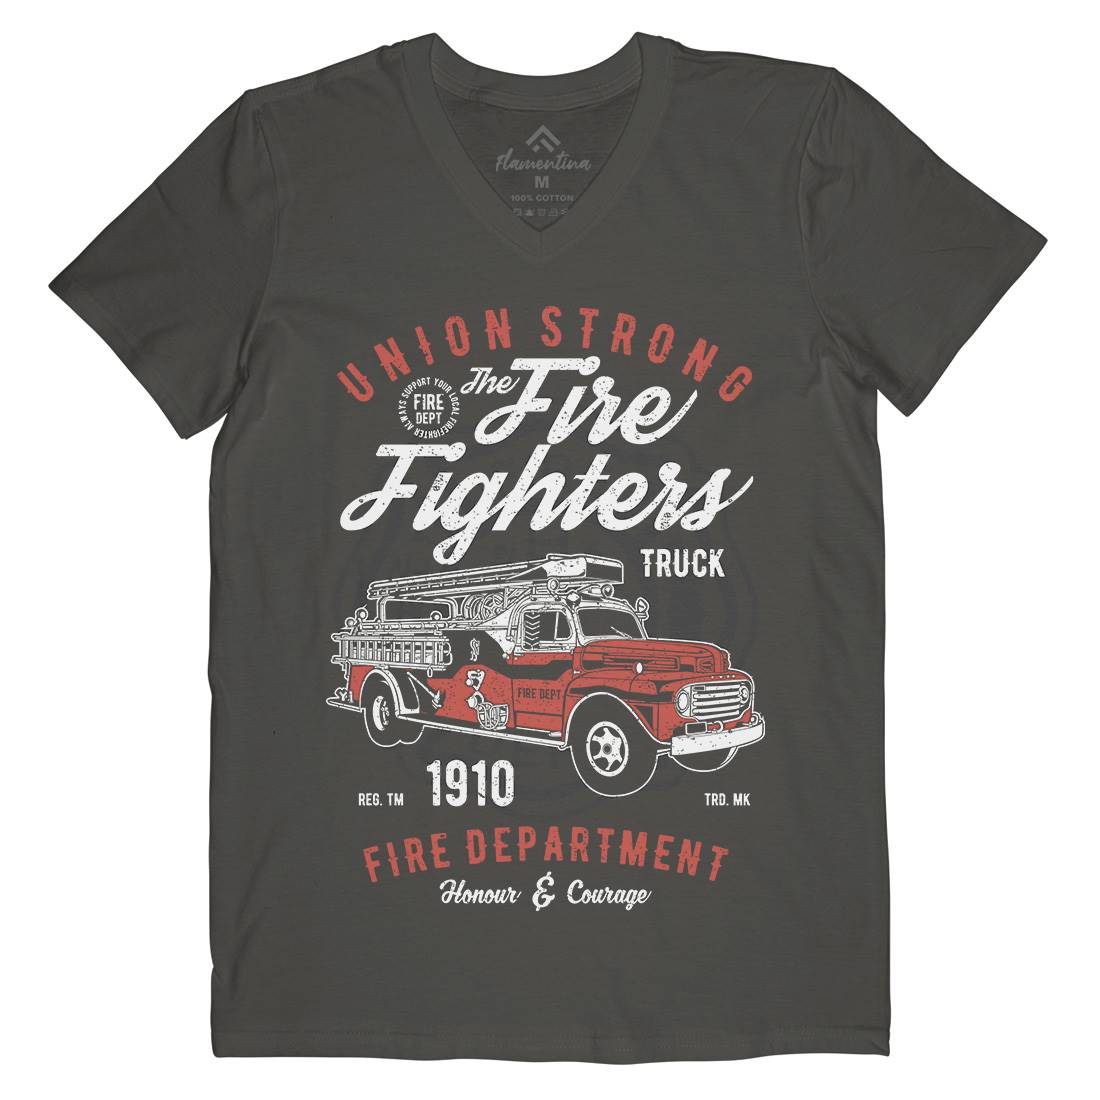 Union Strong Mens V-Neck T-Shirt Firefighters A781